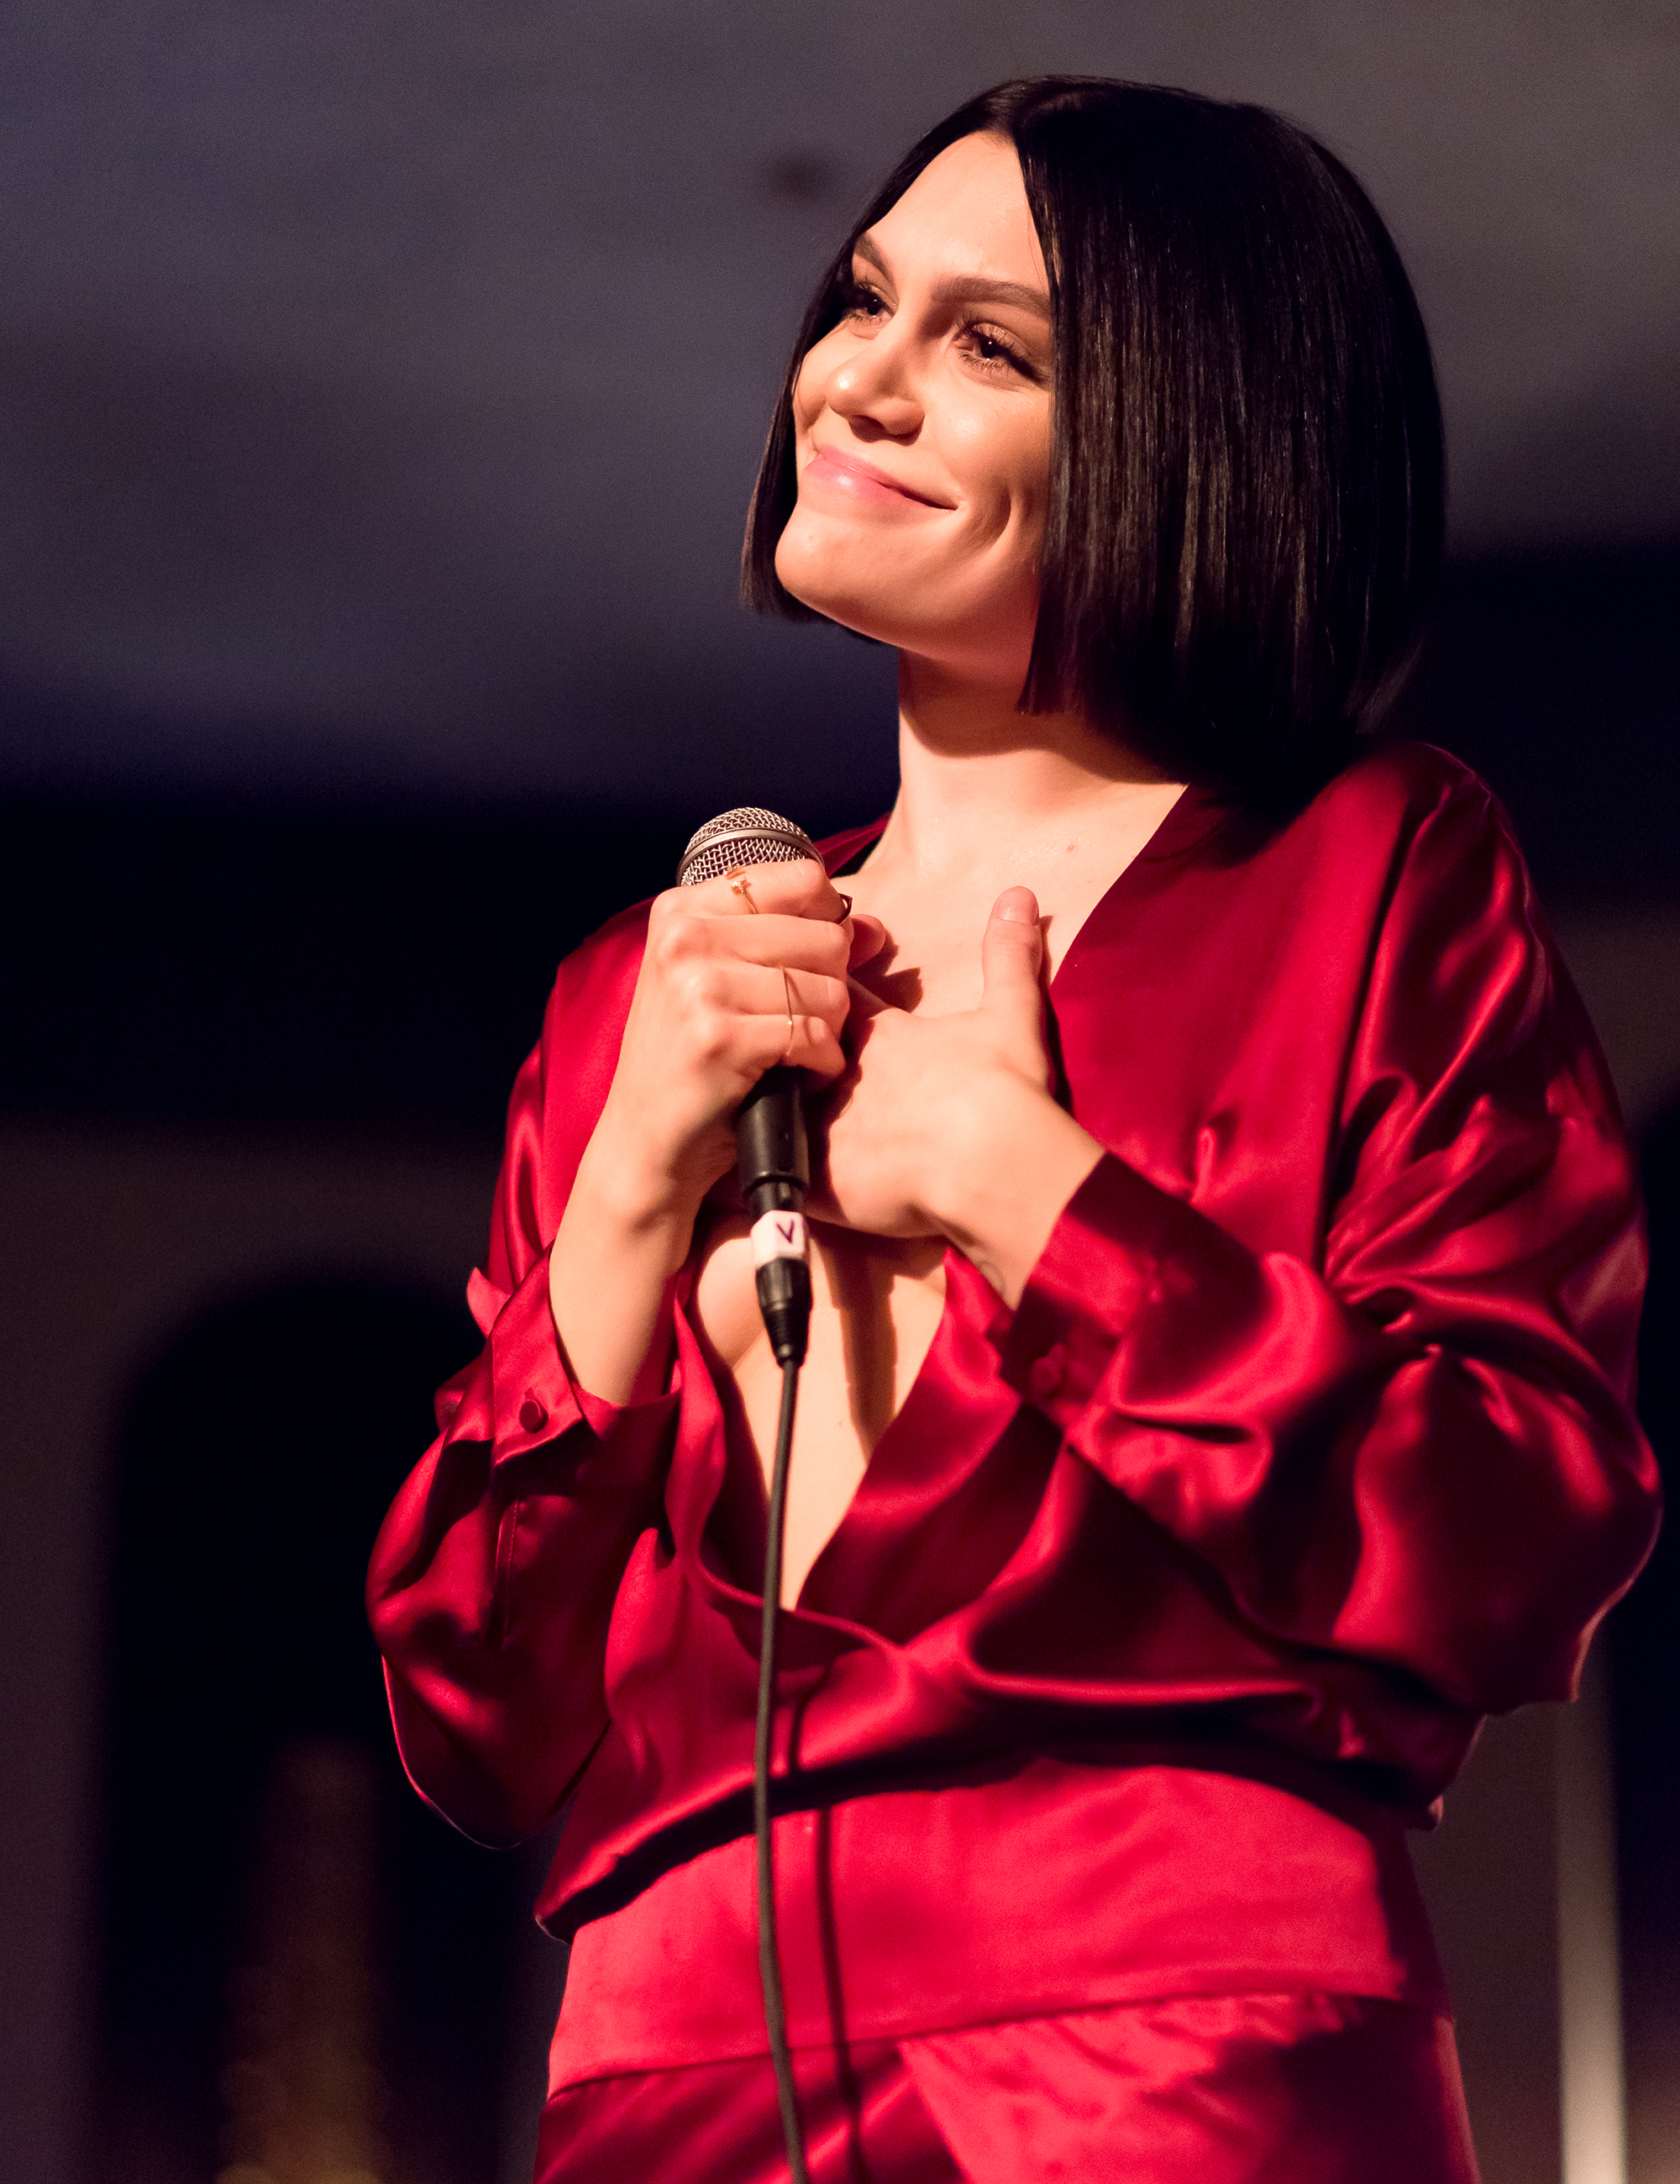 File:Jessie J performing live at The Peppermint Club 05.jpg - Wikimedia Commons